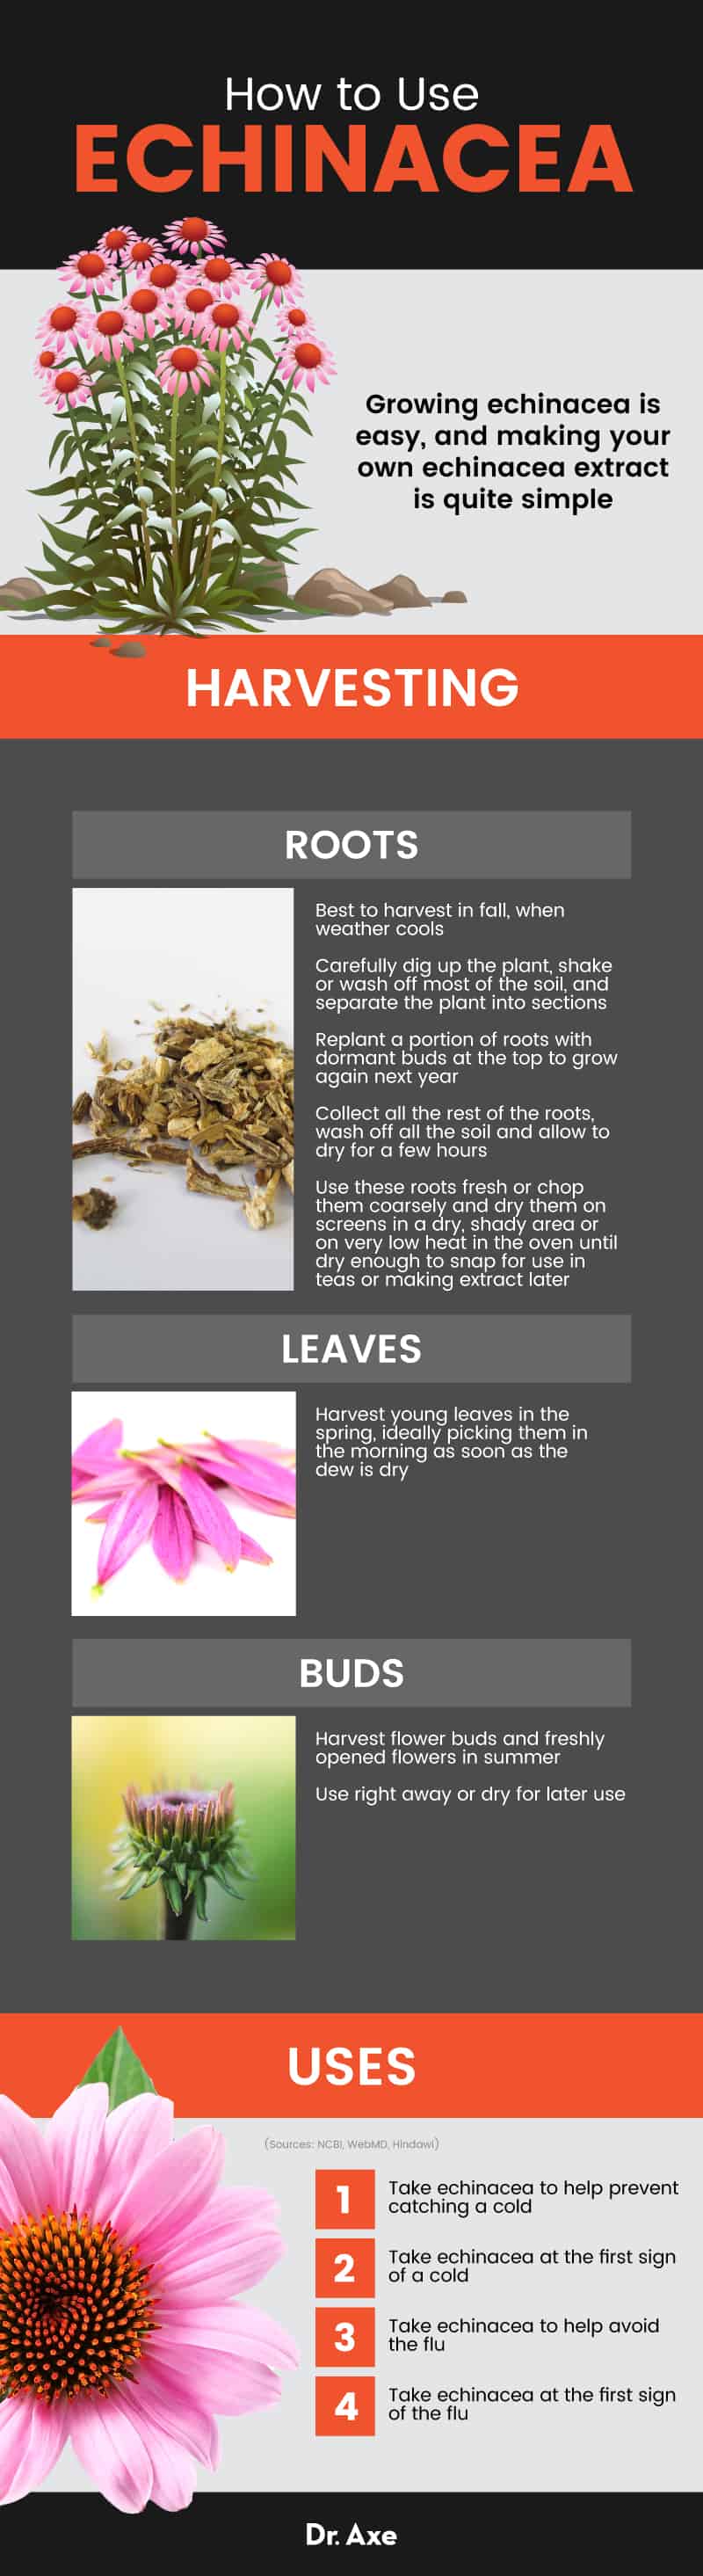 Echinacea uses - Dr. Axe